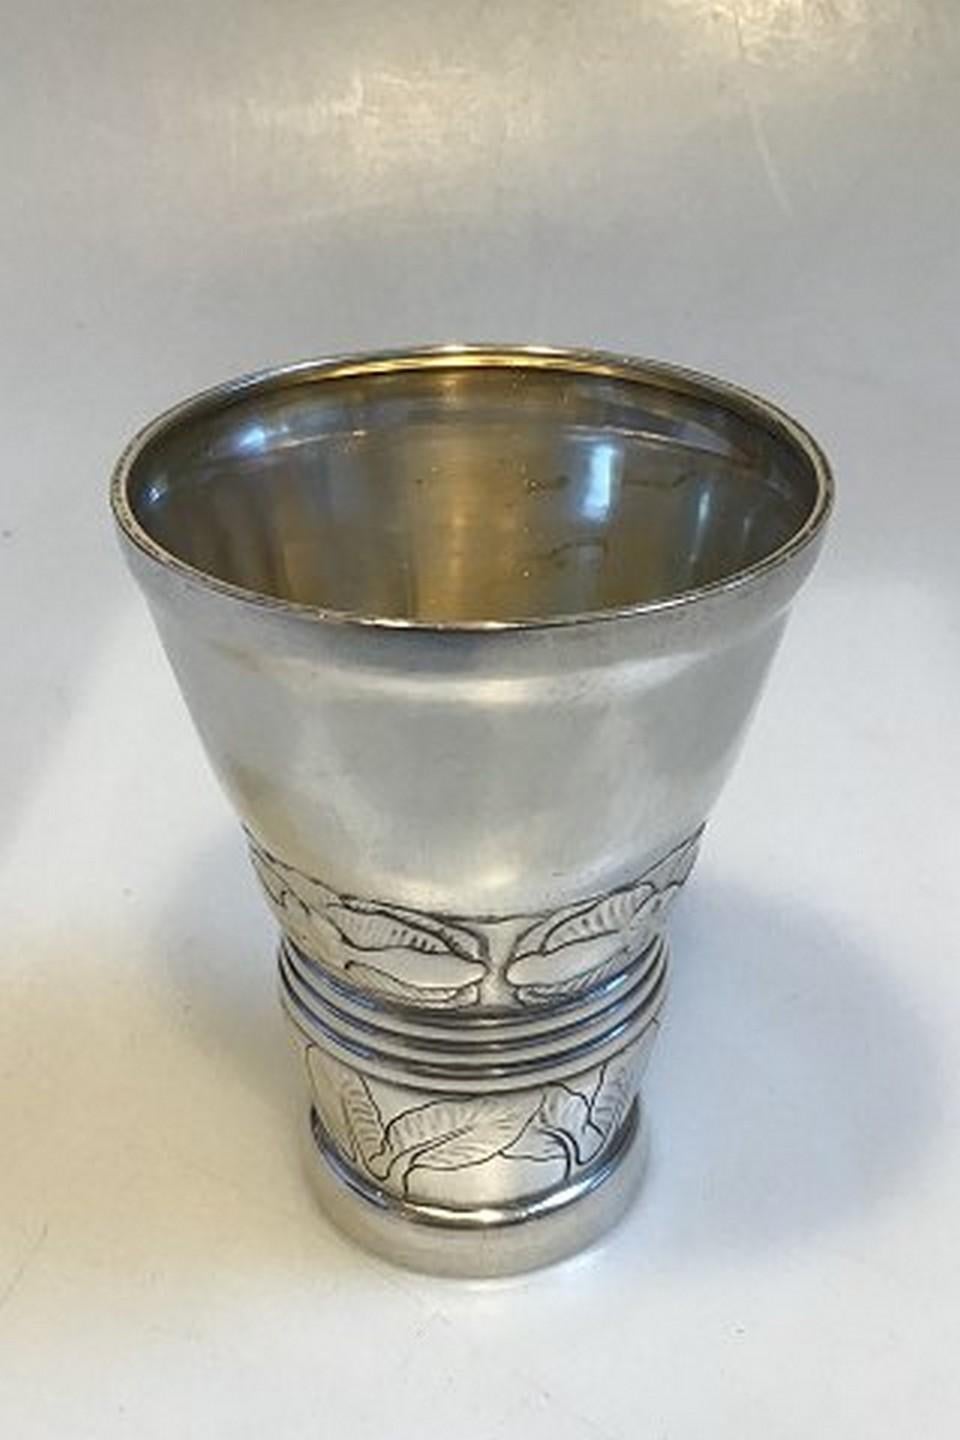 Very early Georg Jensen Beaker in silver from 1905.

Measures: 11.1cm high and 8.3cm in diameter top

Weight is 141 grams / 5 oz.

With French import marks.

Item no.: 450567.